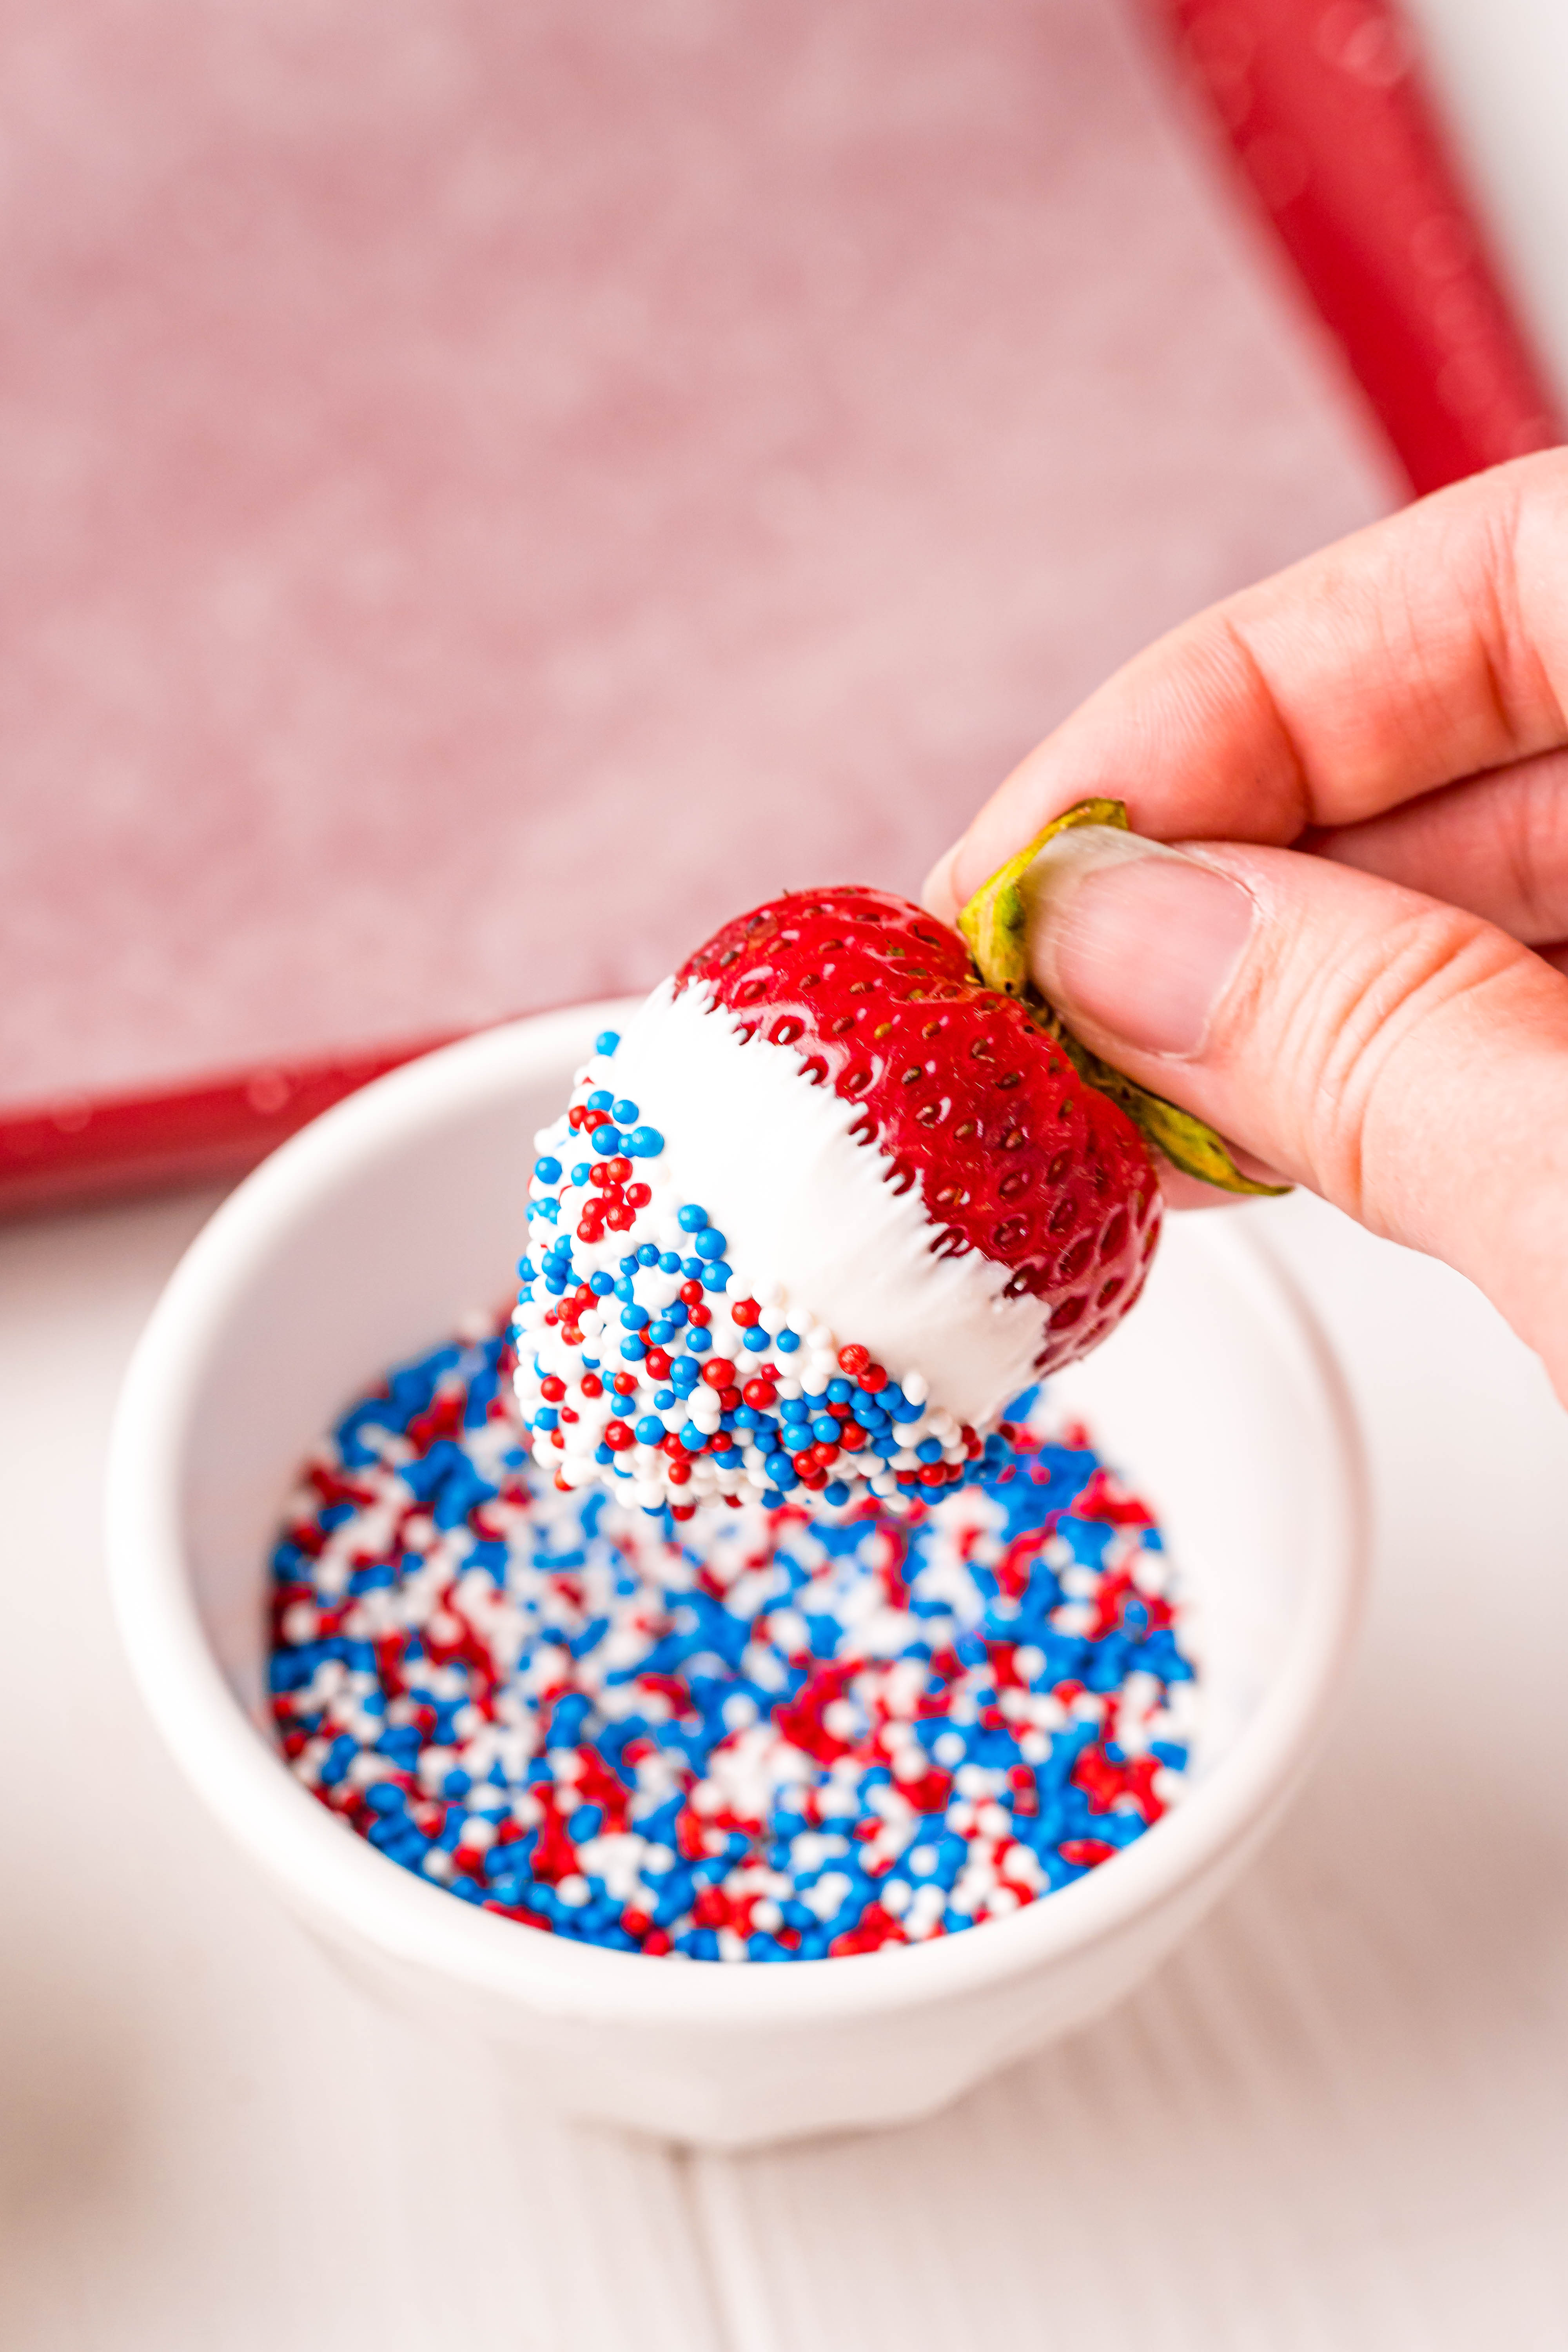 A woman's hand dipping a white chocolate covered strawberry in red, white, and blue sprinkles.